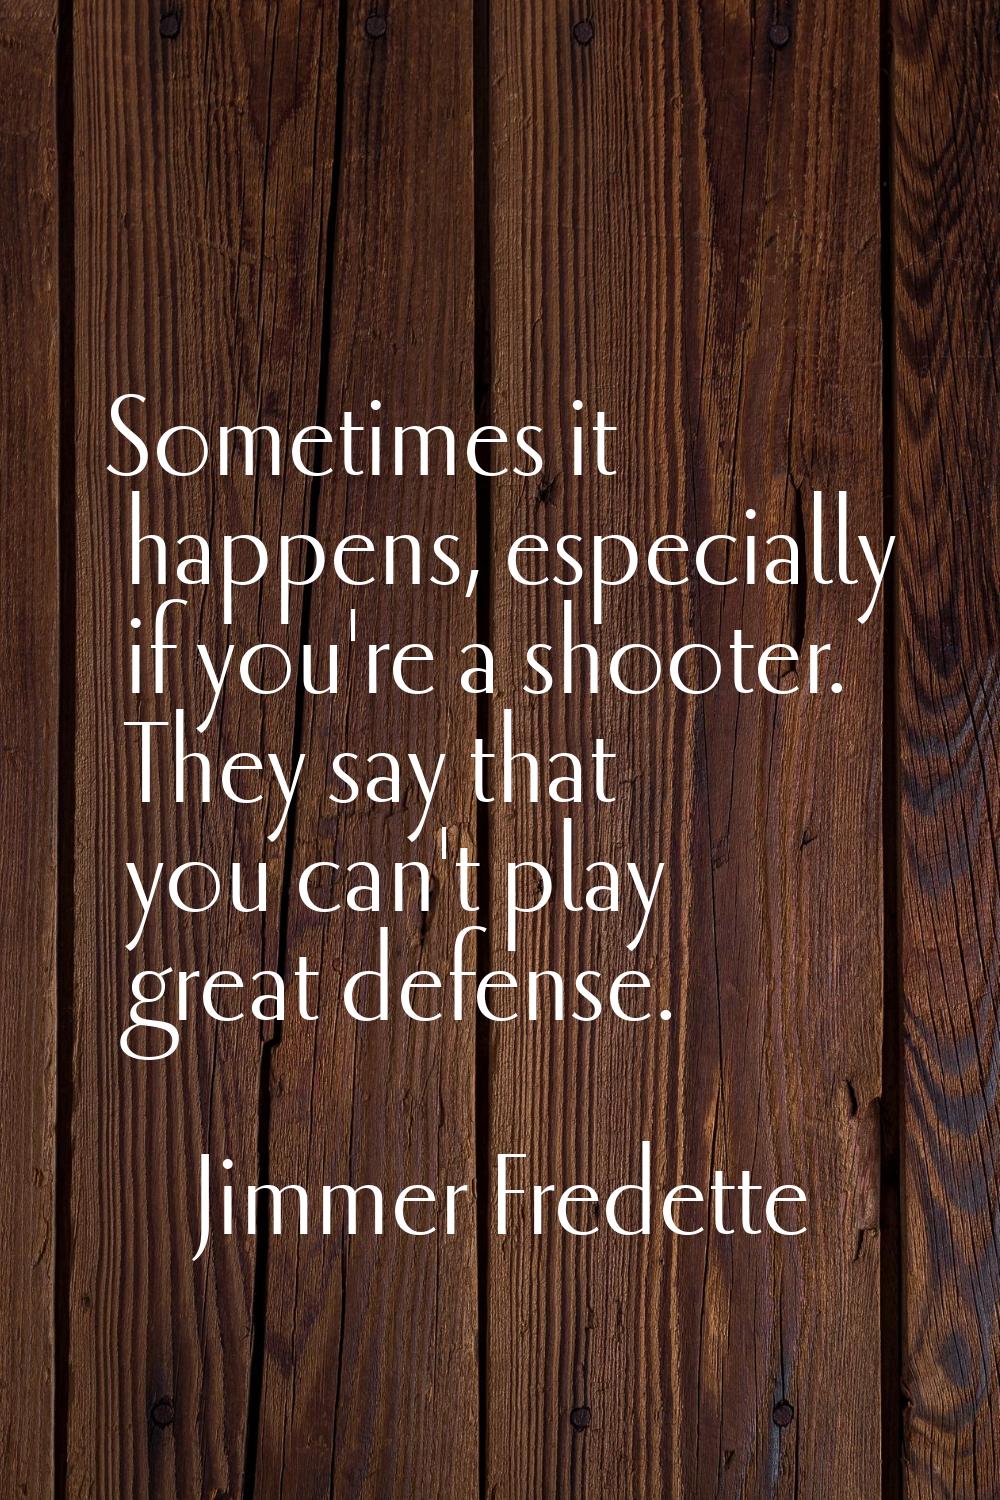 Sometimes it happens, especially if you're a shooter. They say that you can't play great defense.